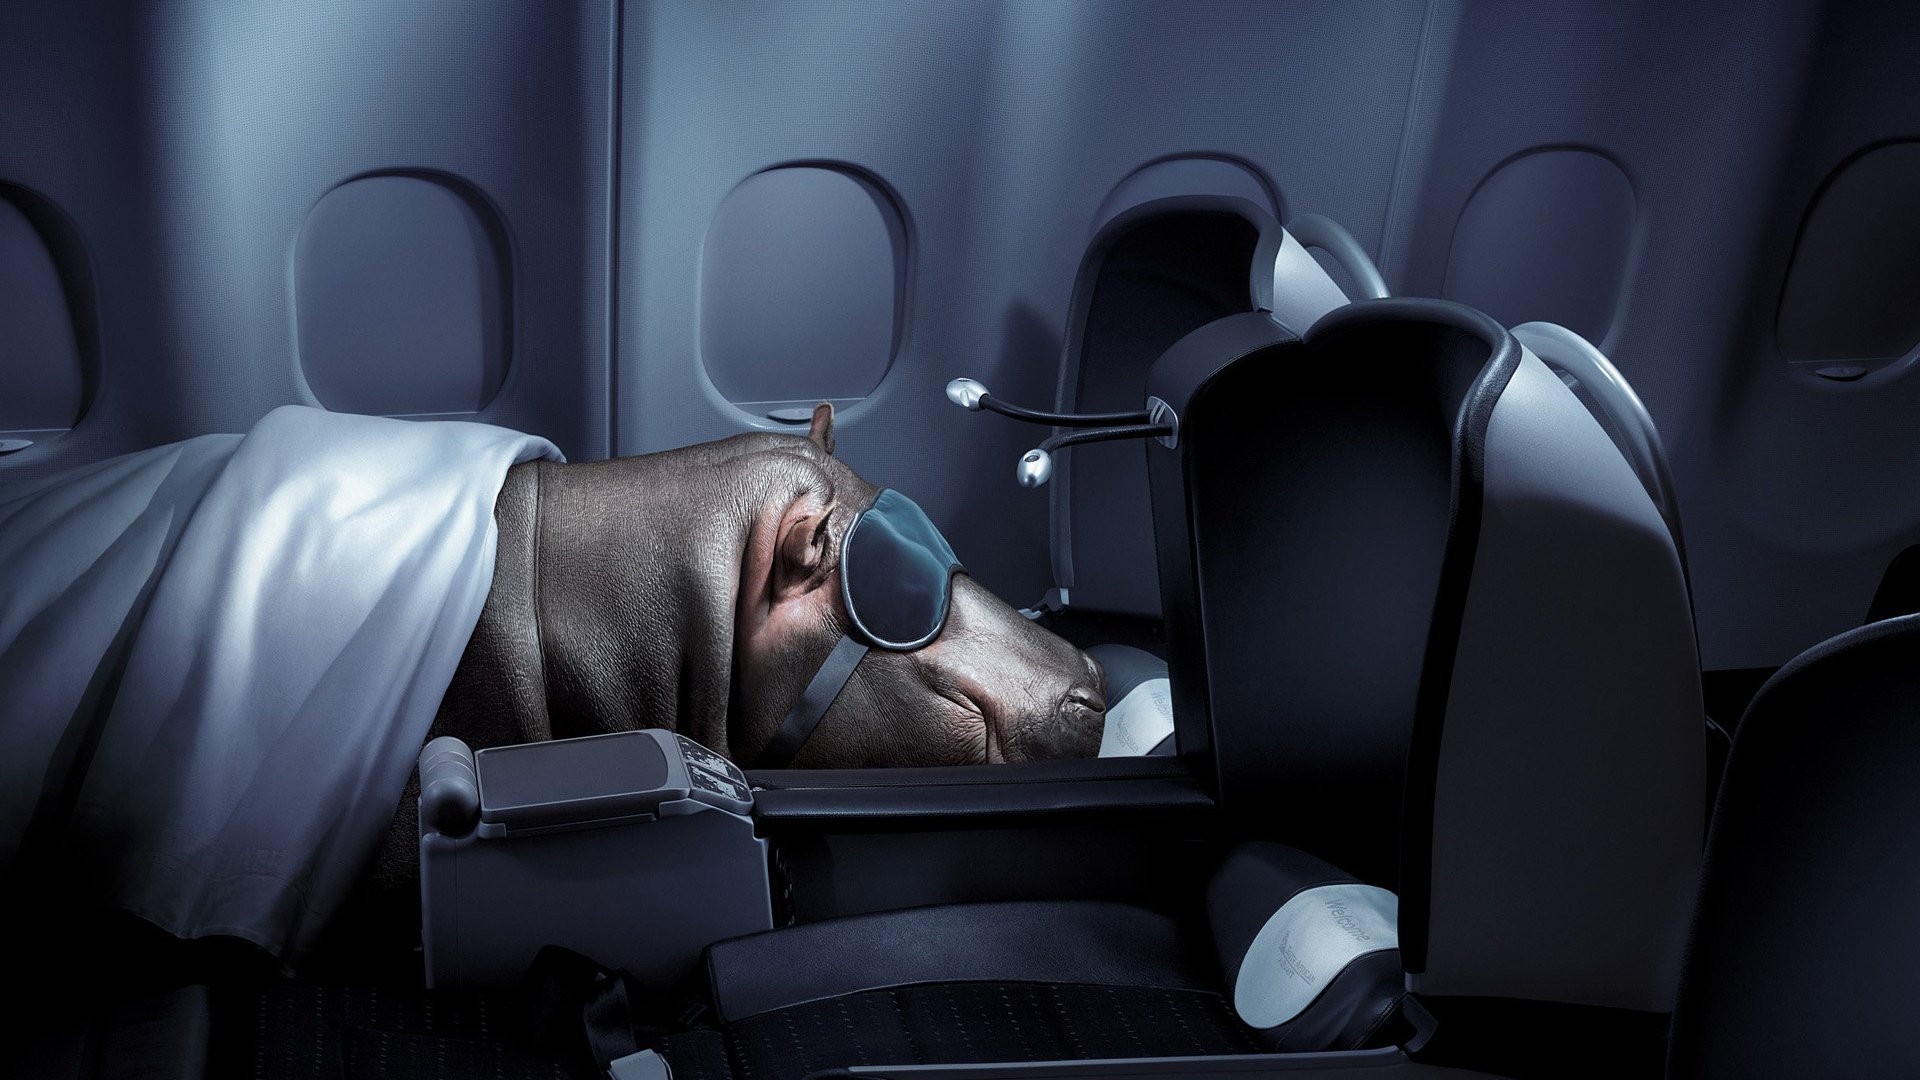 situation, Humor, Funny, Aircrafts, Animals, Hippo, Jets, Airplane Wallpaper